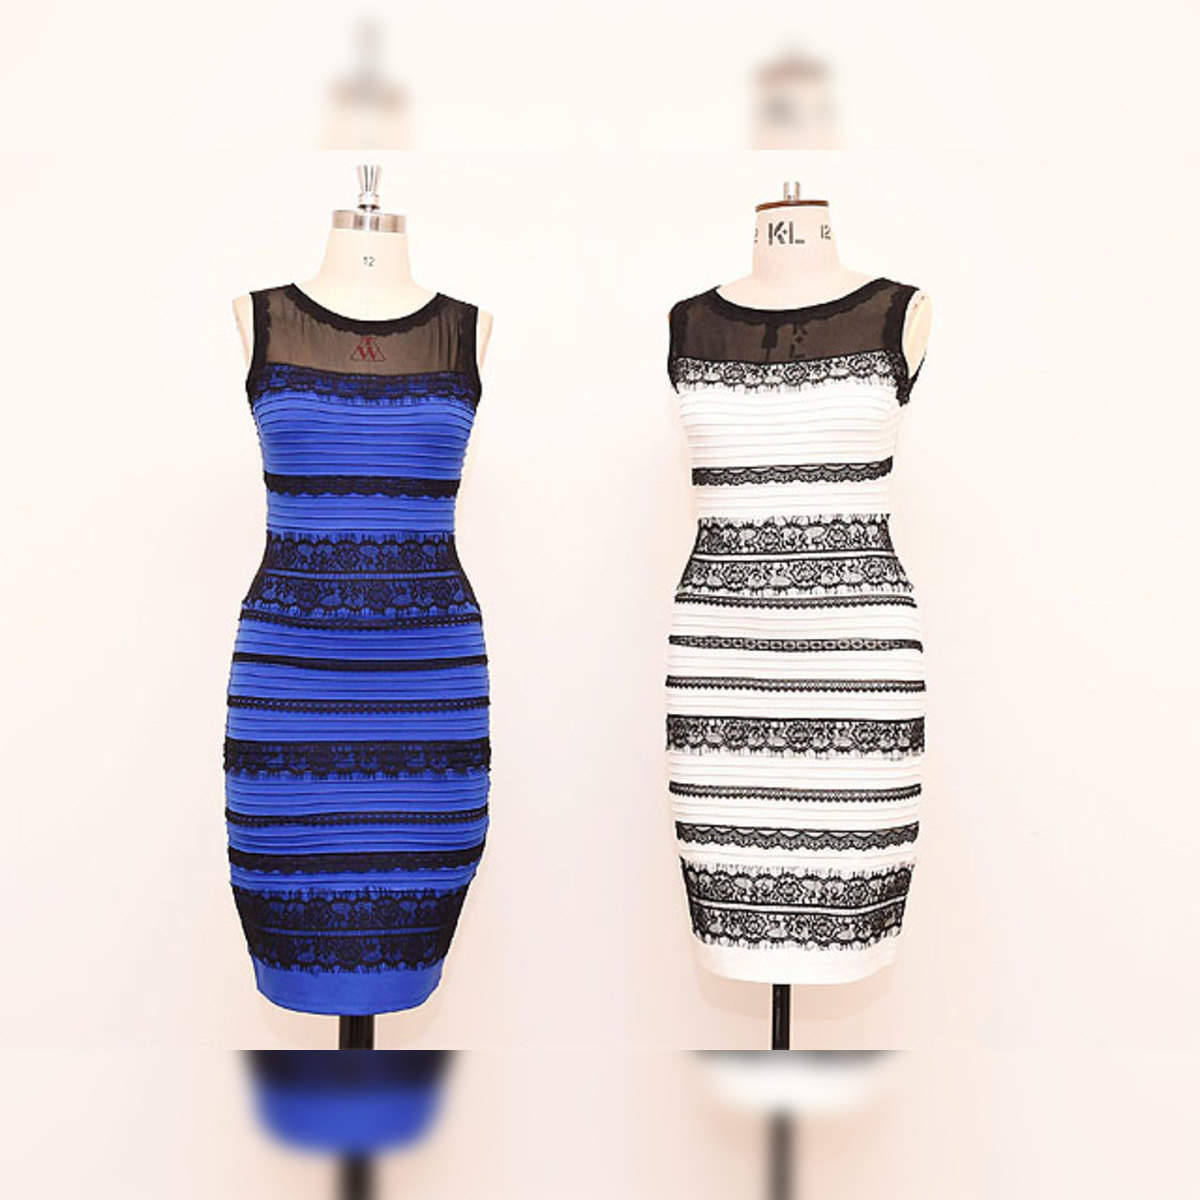 Black & blue or gold & white? Mystery of the dress solved - The